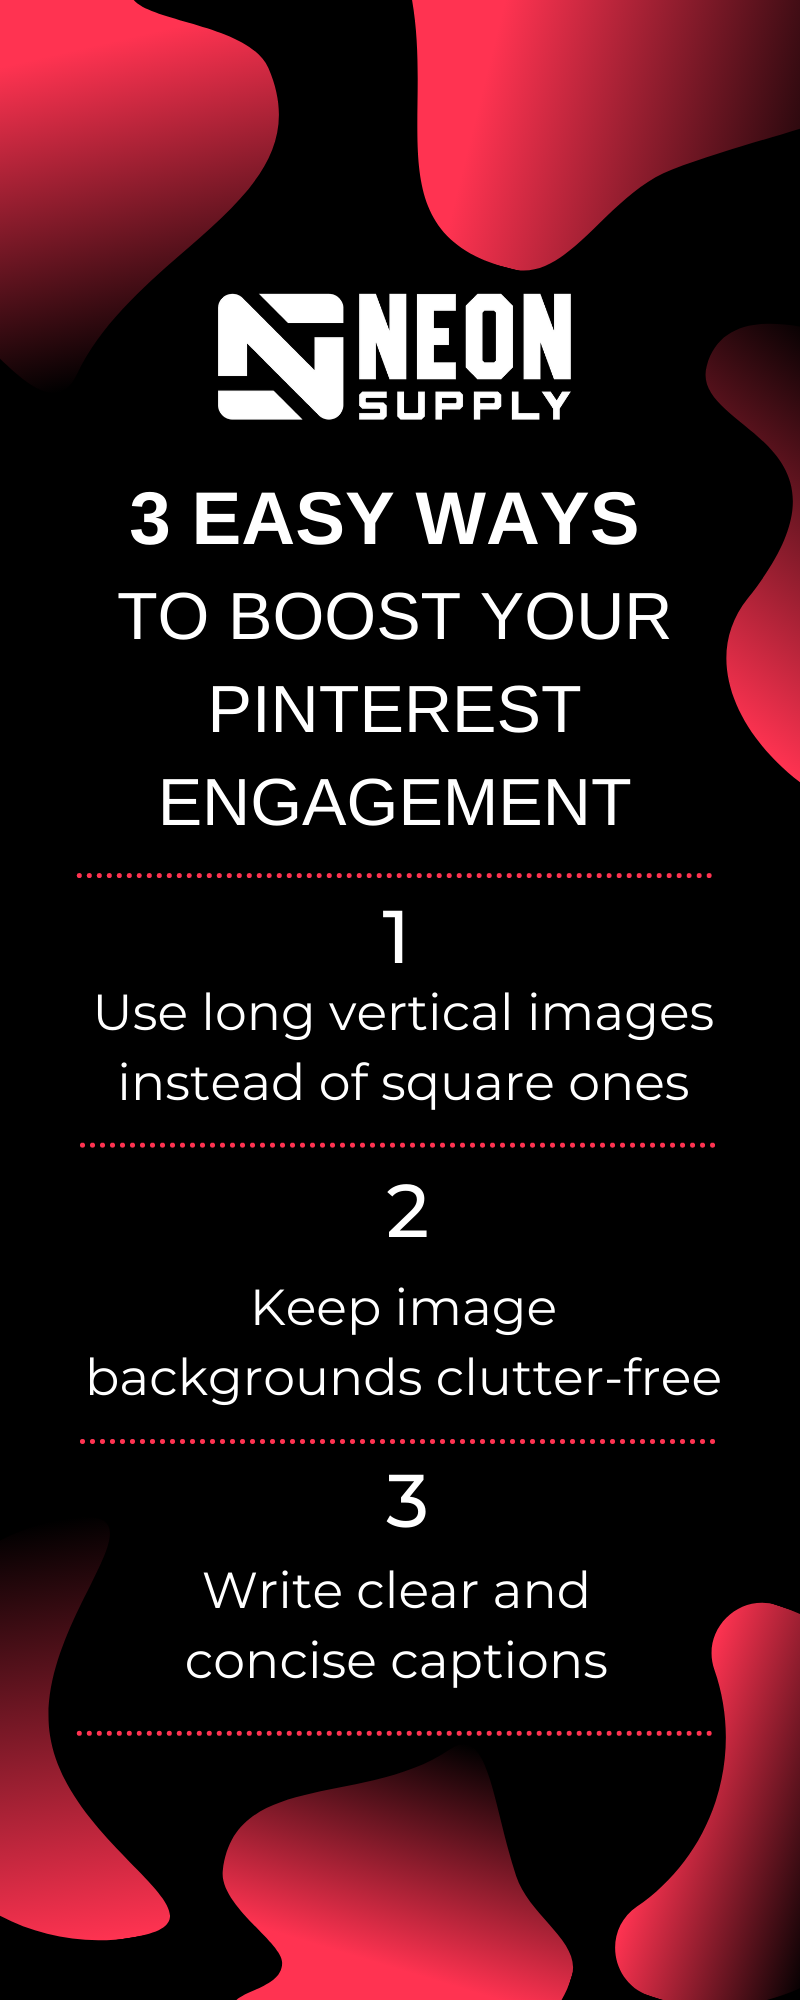 3 EASY TIPS TO BOOST YOUR PINTEREST ENGAGEMENT